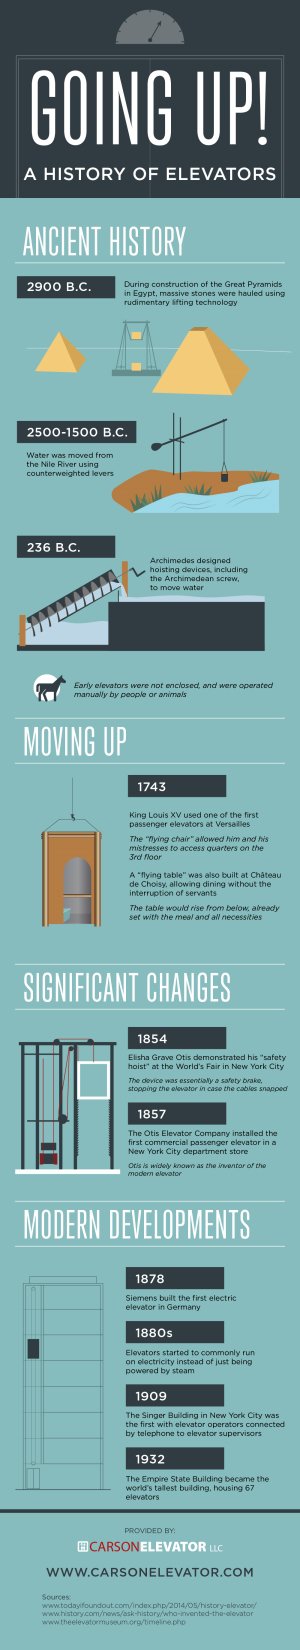 History of the elevator infographic by Carson Elevator LLC